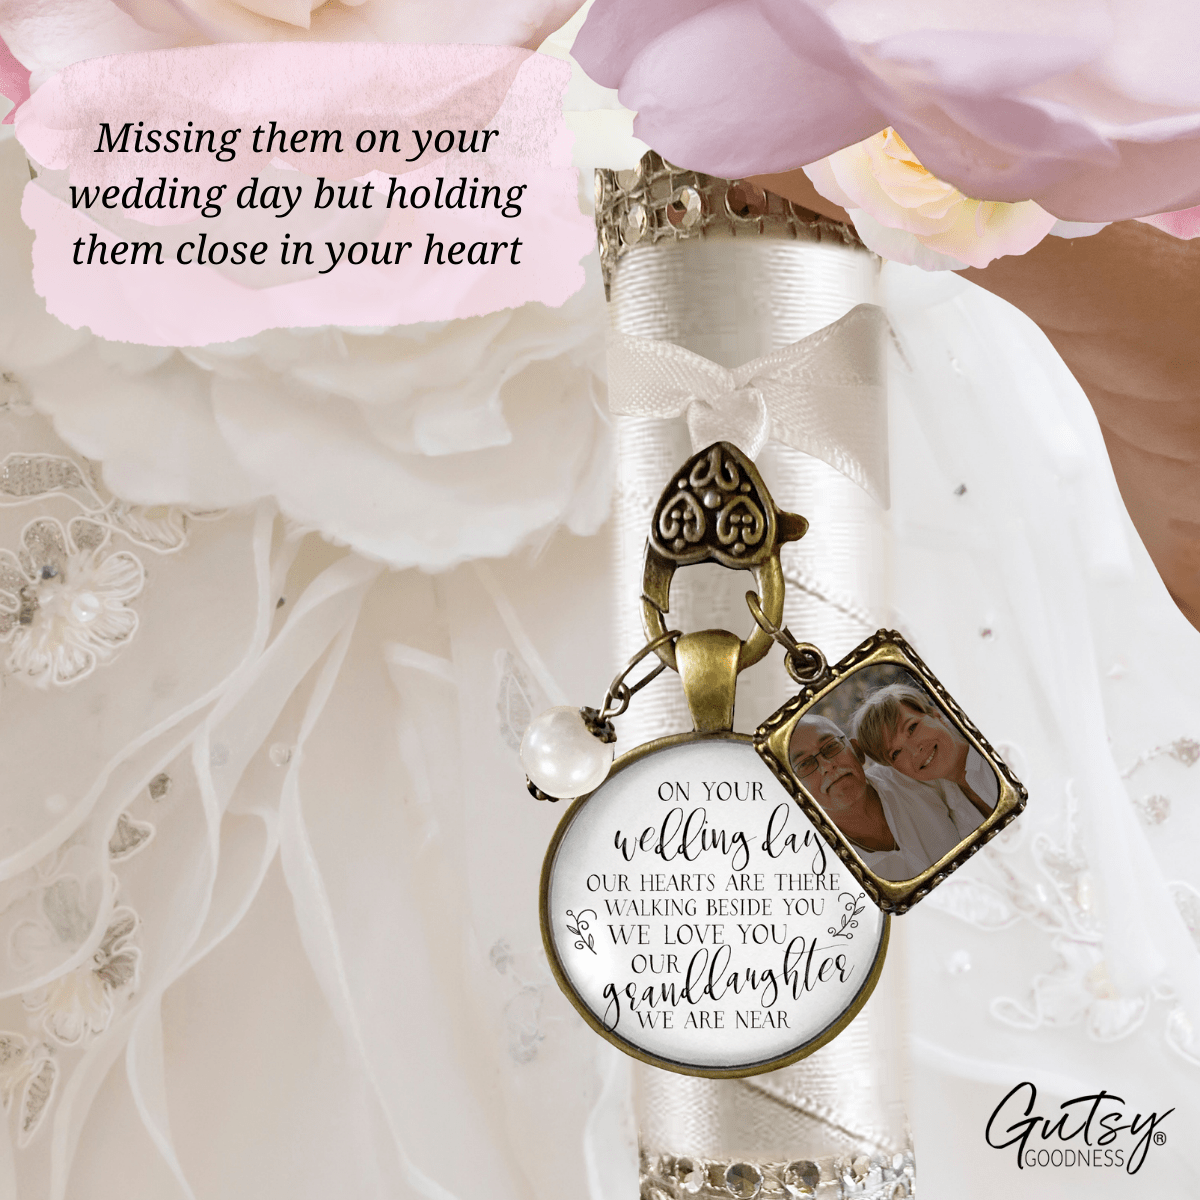 On Your Wedding Day OUR Heart Is There Walking Beside You GRANDDAUGHTER | DESTINATION BRONZE - WHITE - WHITE BEAD